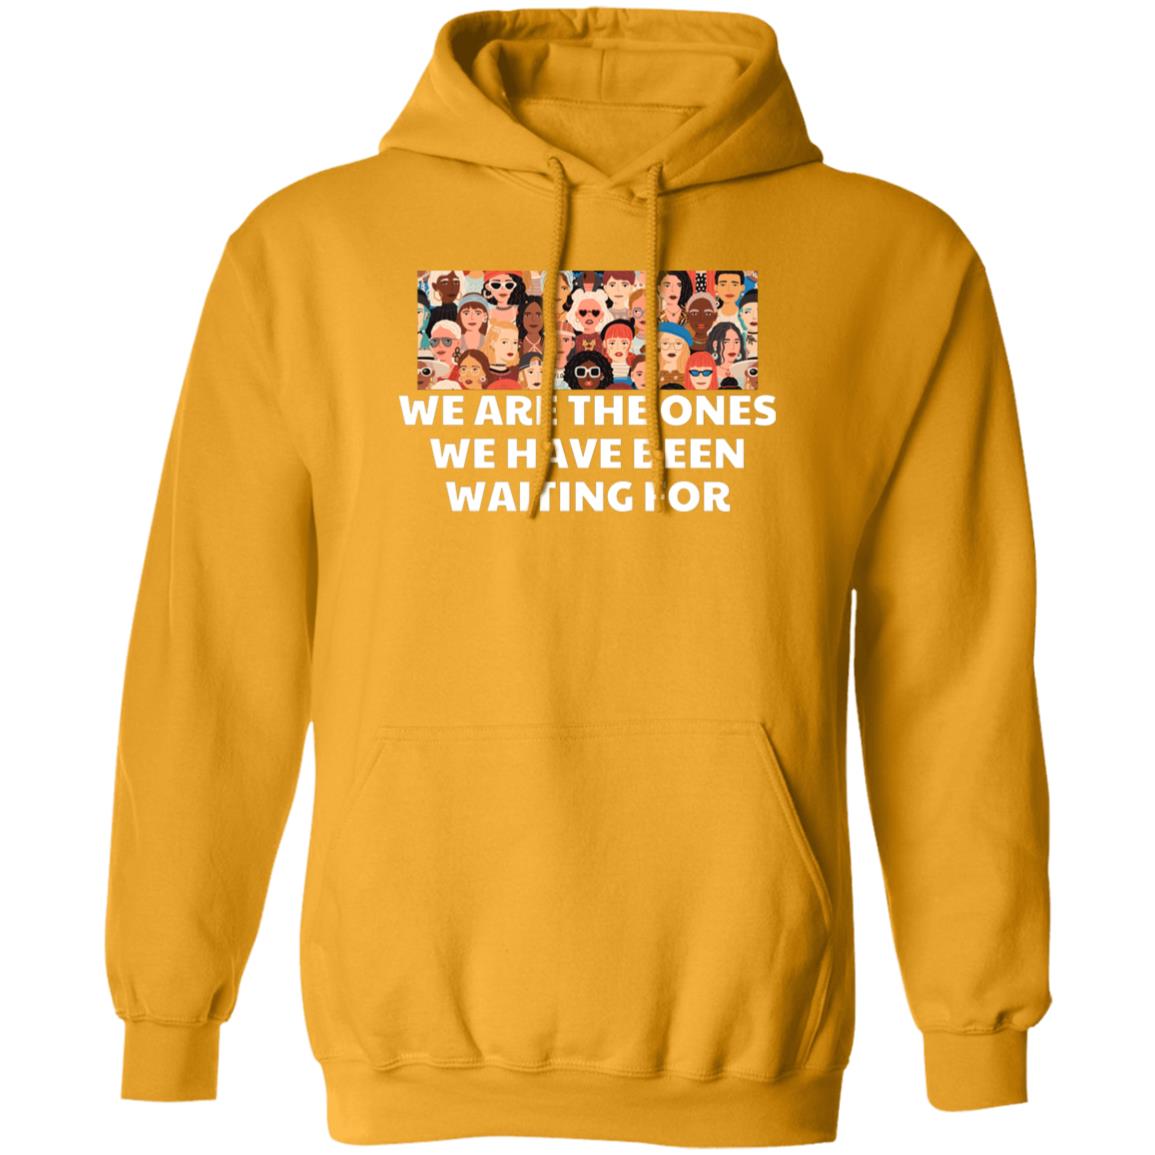 We Are The Ones We Have Been Waiting For Hooded Sweatshirt